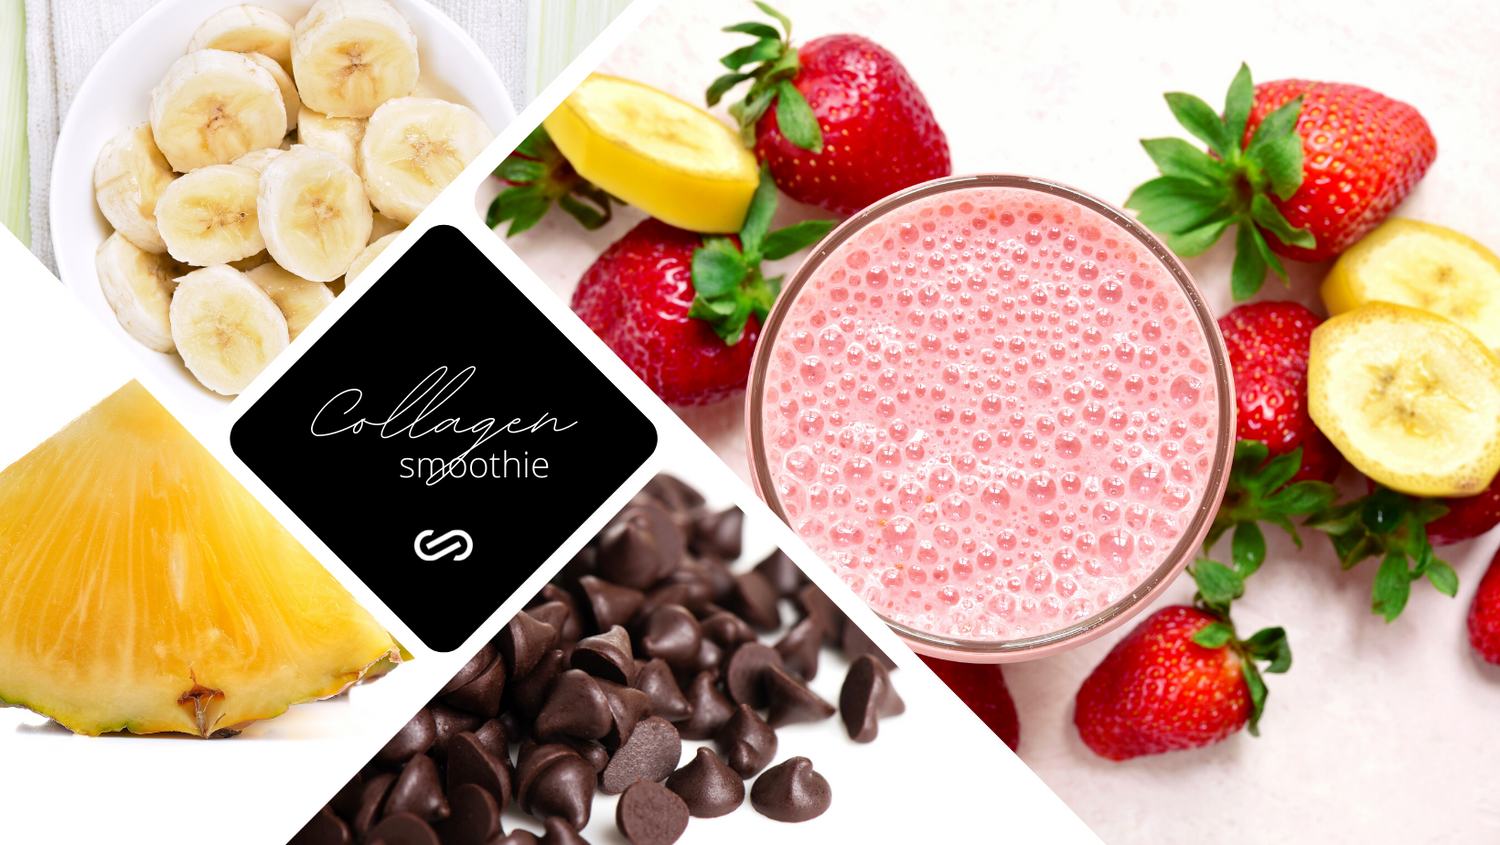 Boost Your Collagen With A Delicious Strawberry, Banana & Pineapple Smoothie!